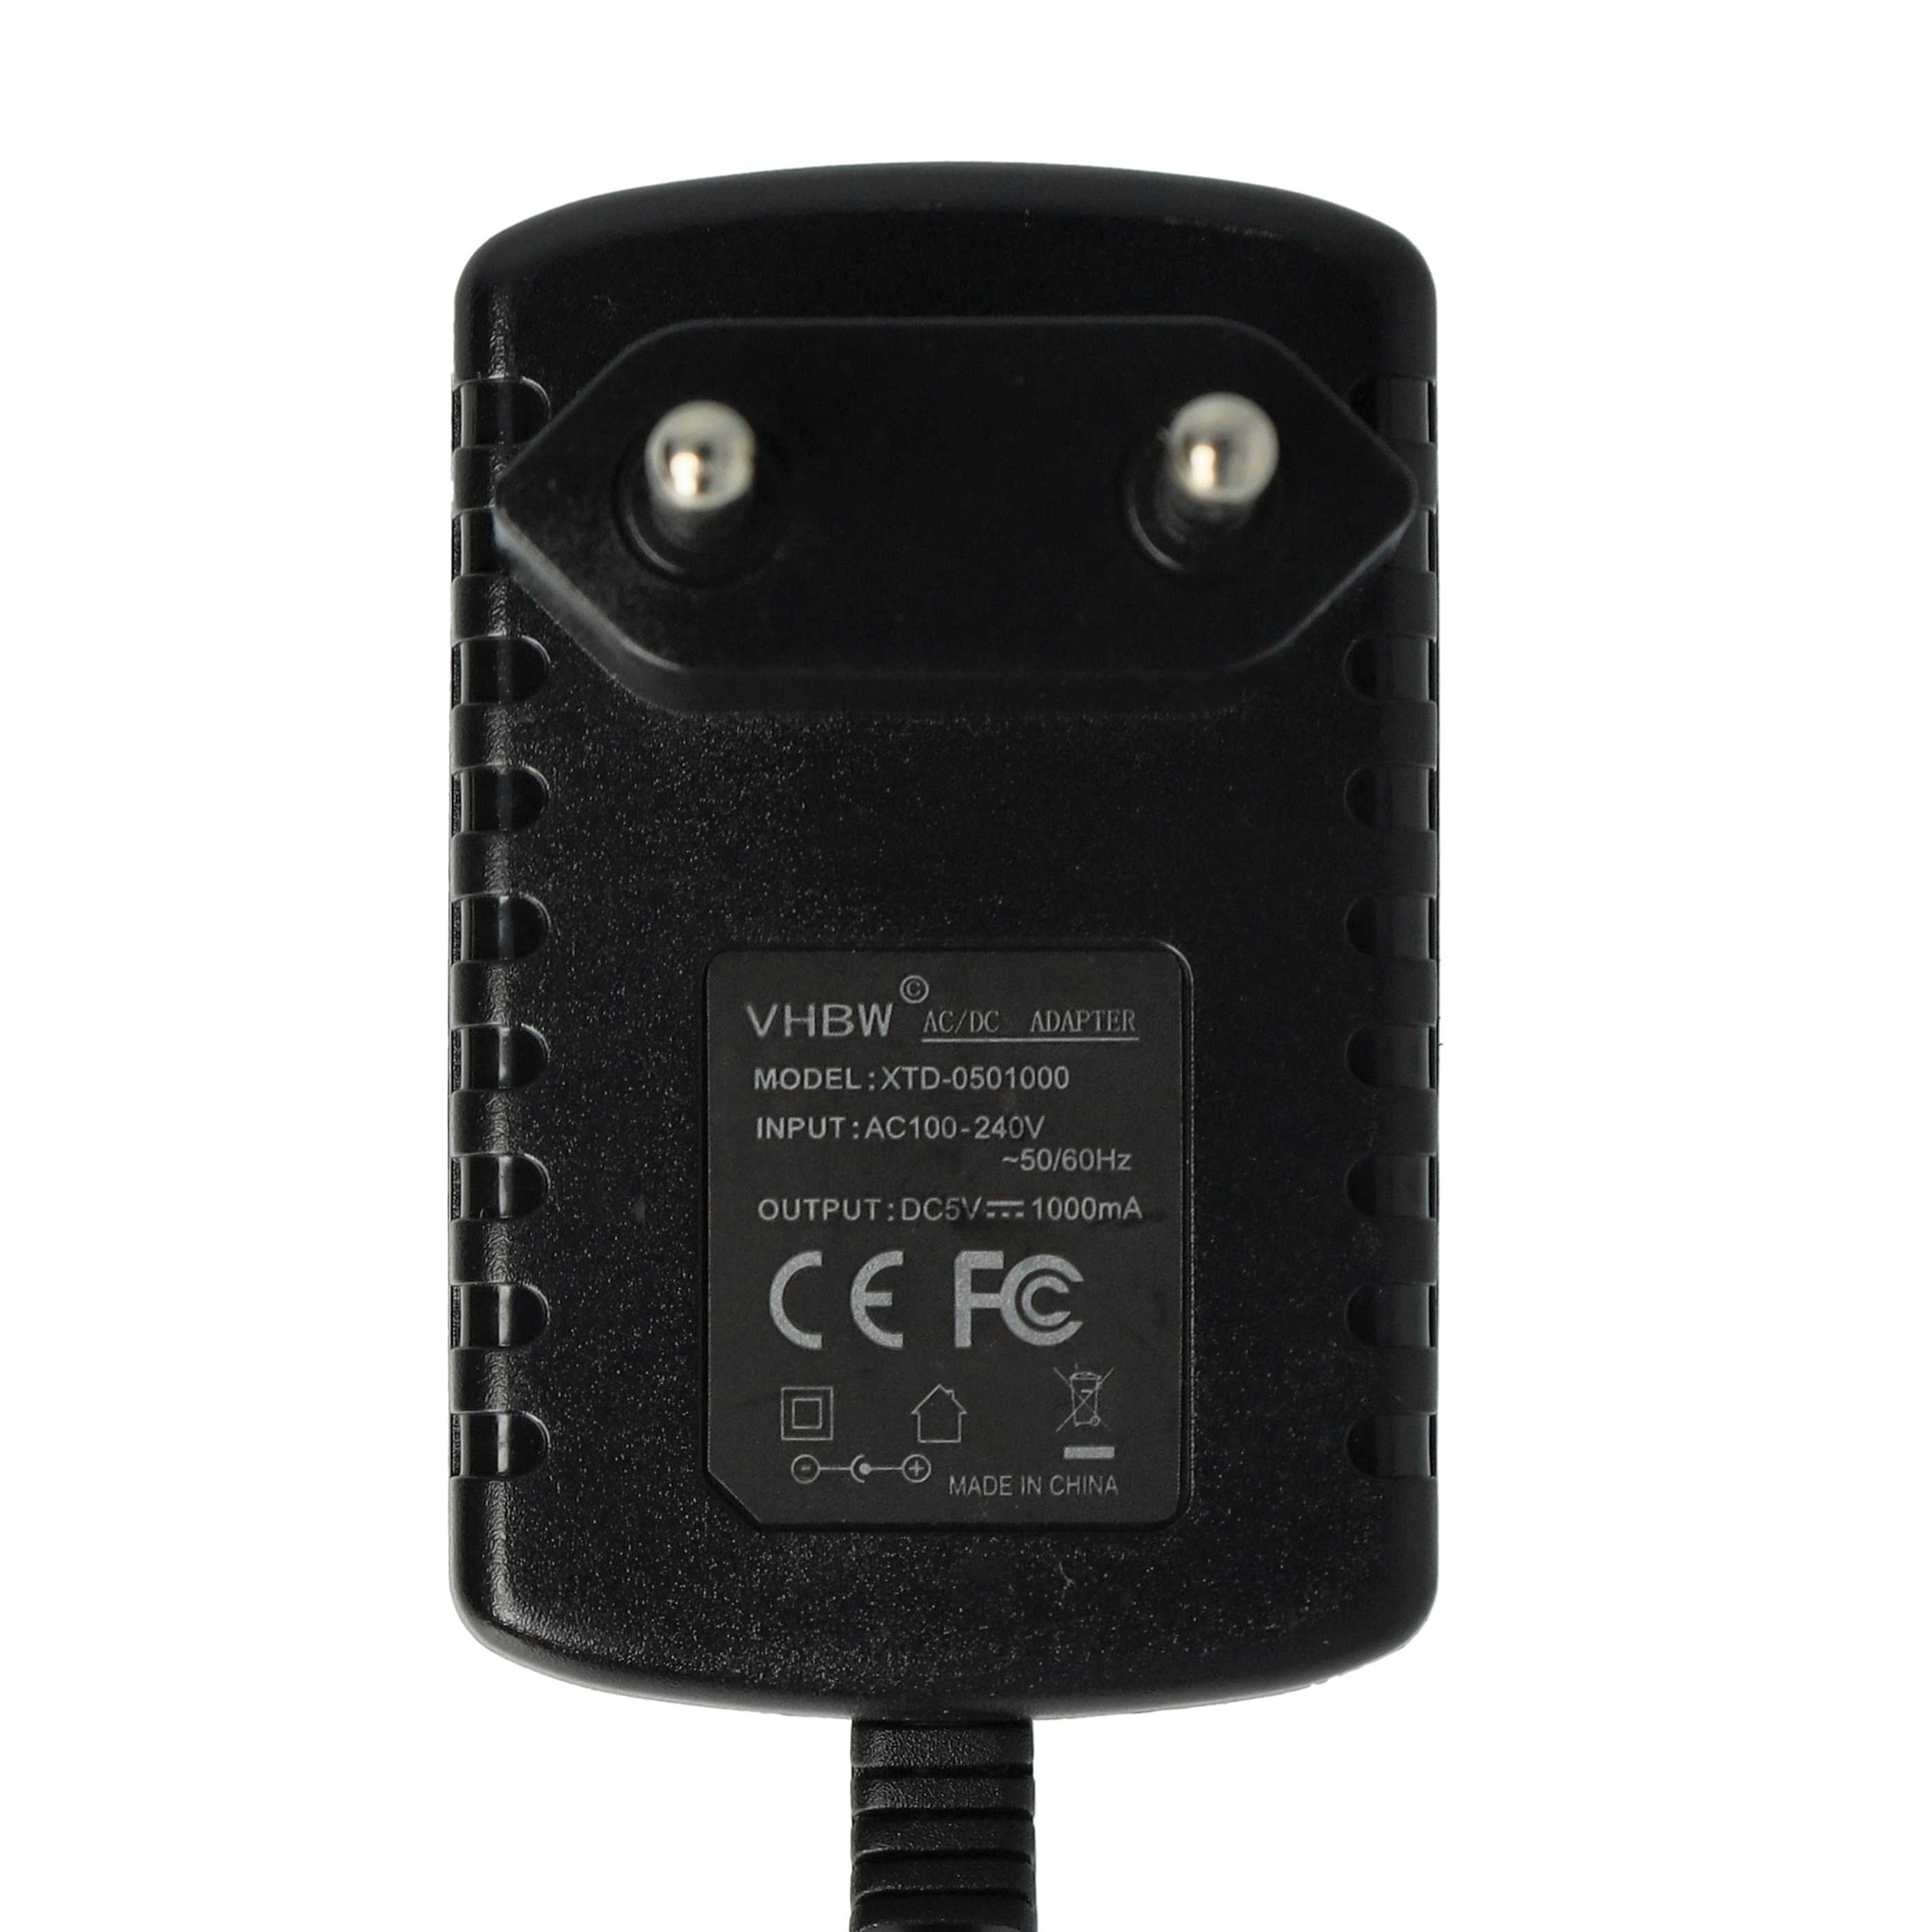 Caricabatterie 110-220 V per Anycool, Samsung D66cellulare ecc